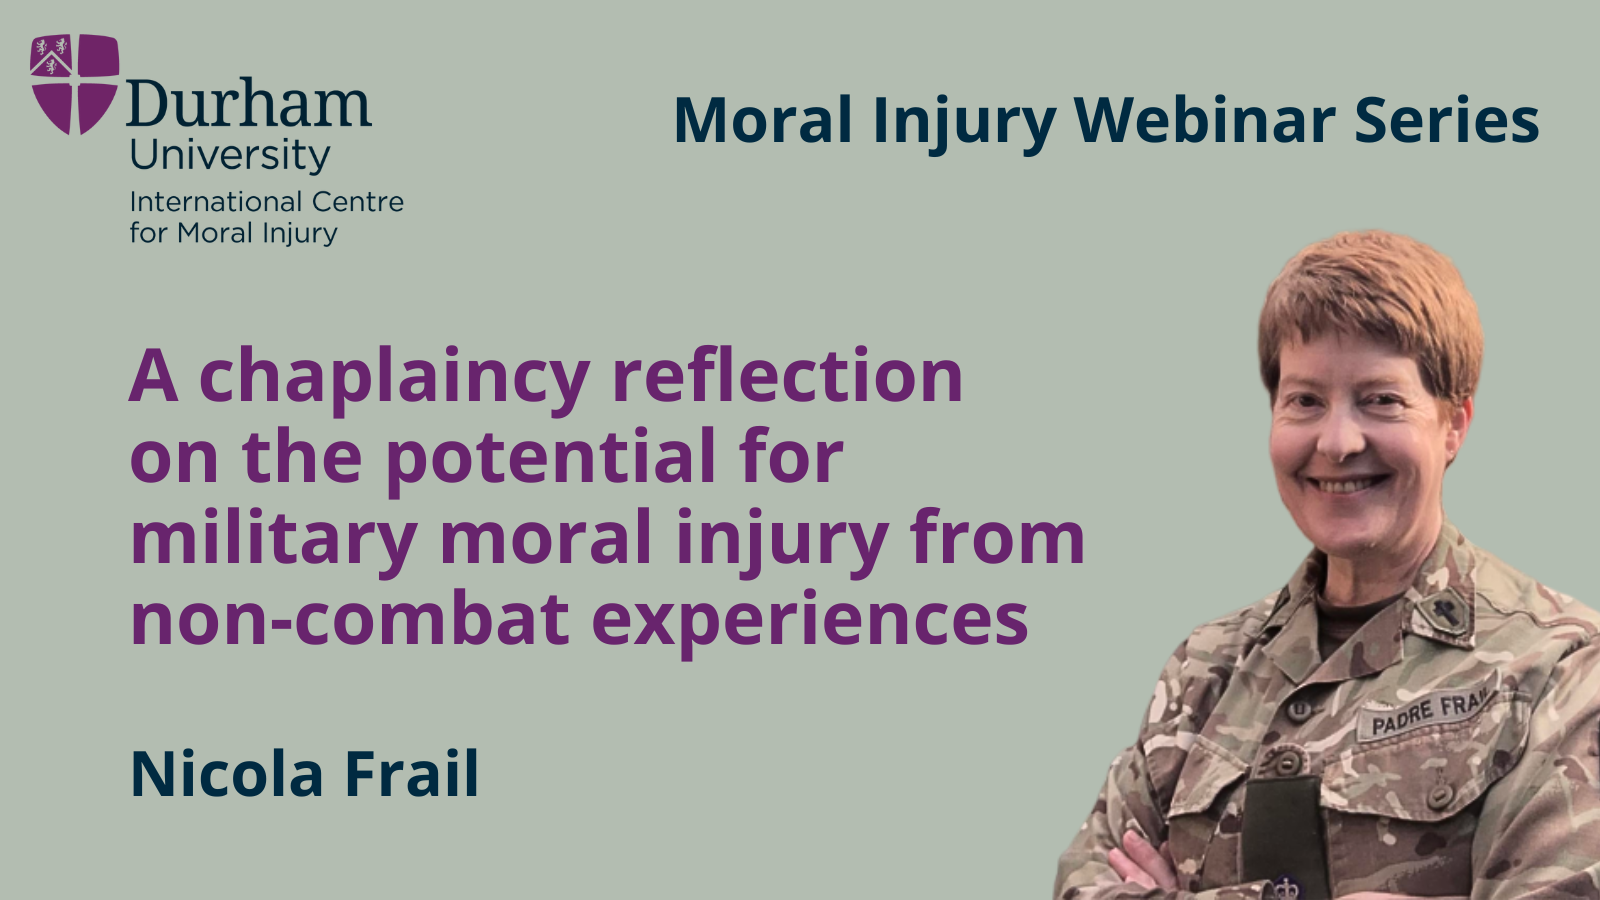 Nicola Frail: A chaplaincy reflection on the potential for military moral injury from non-combat experiences